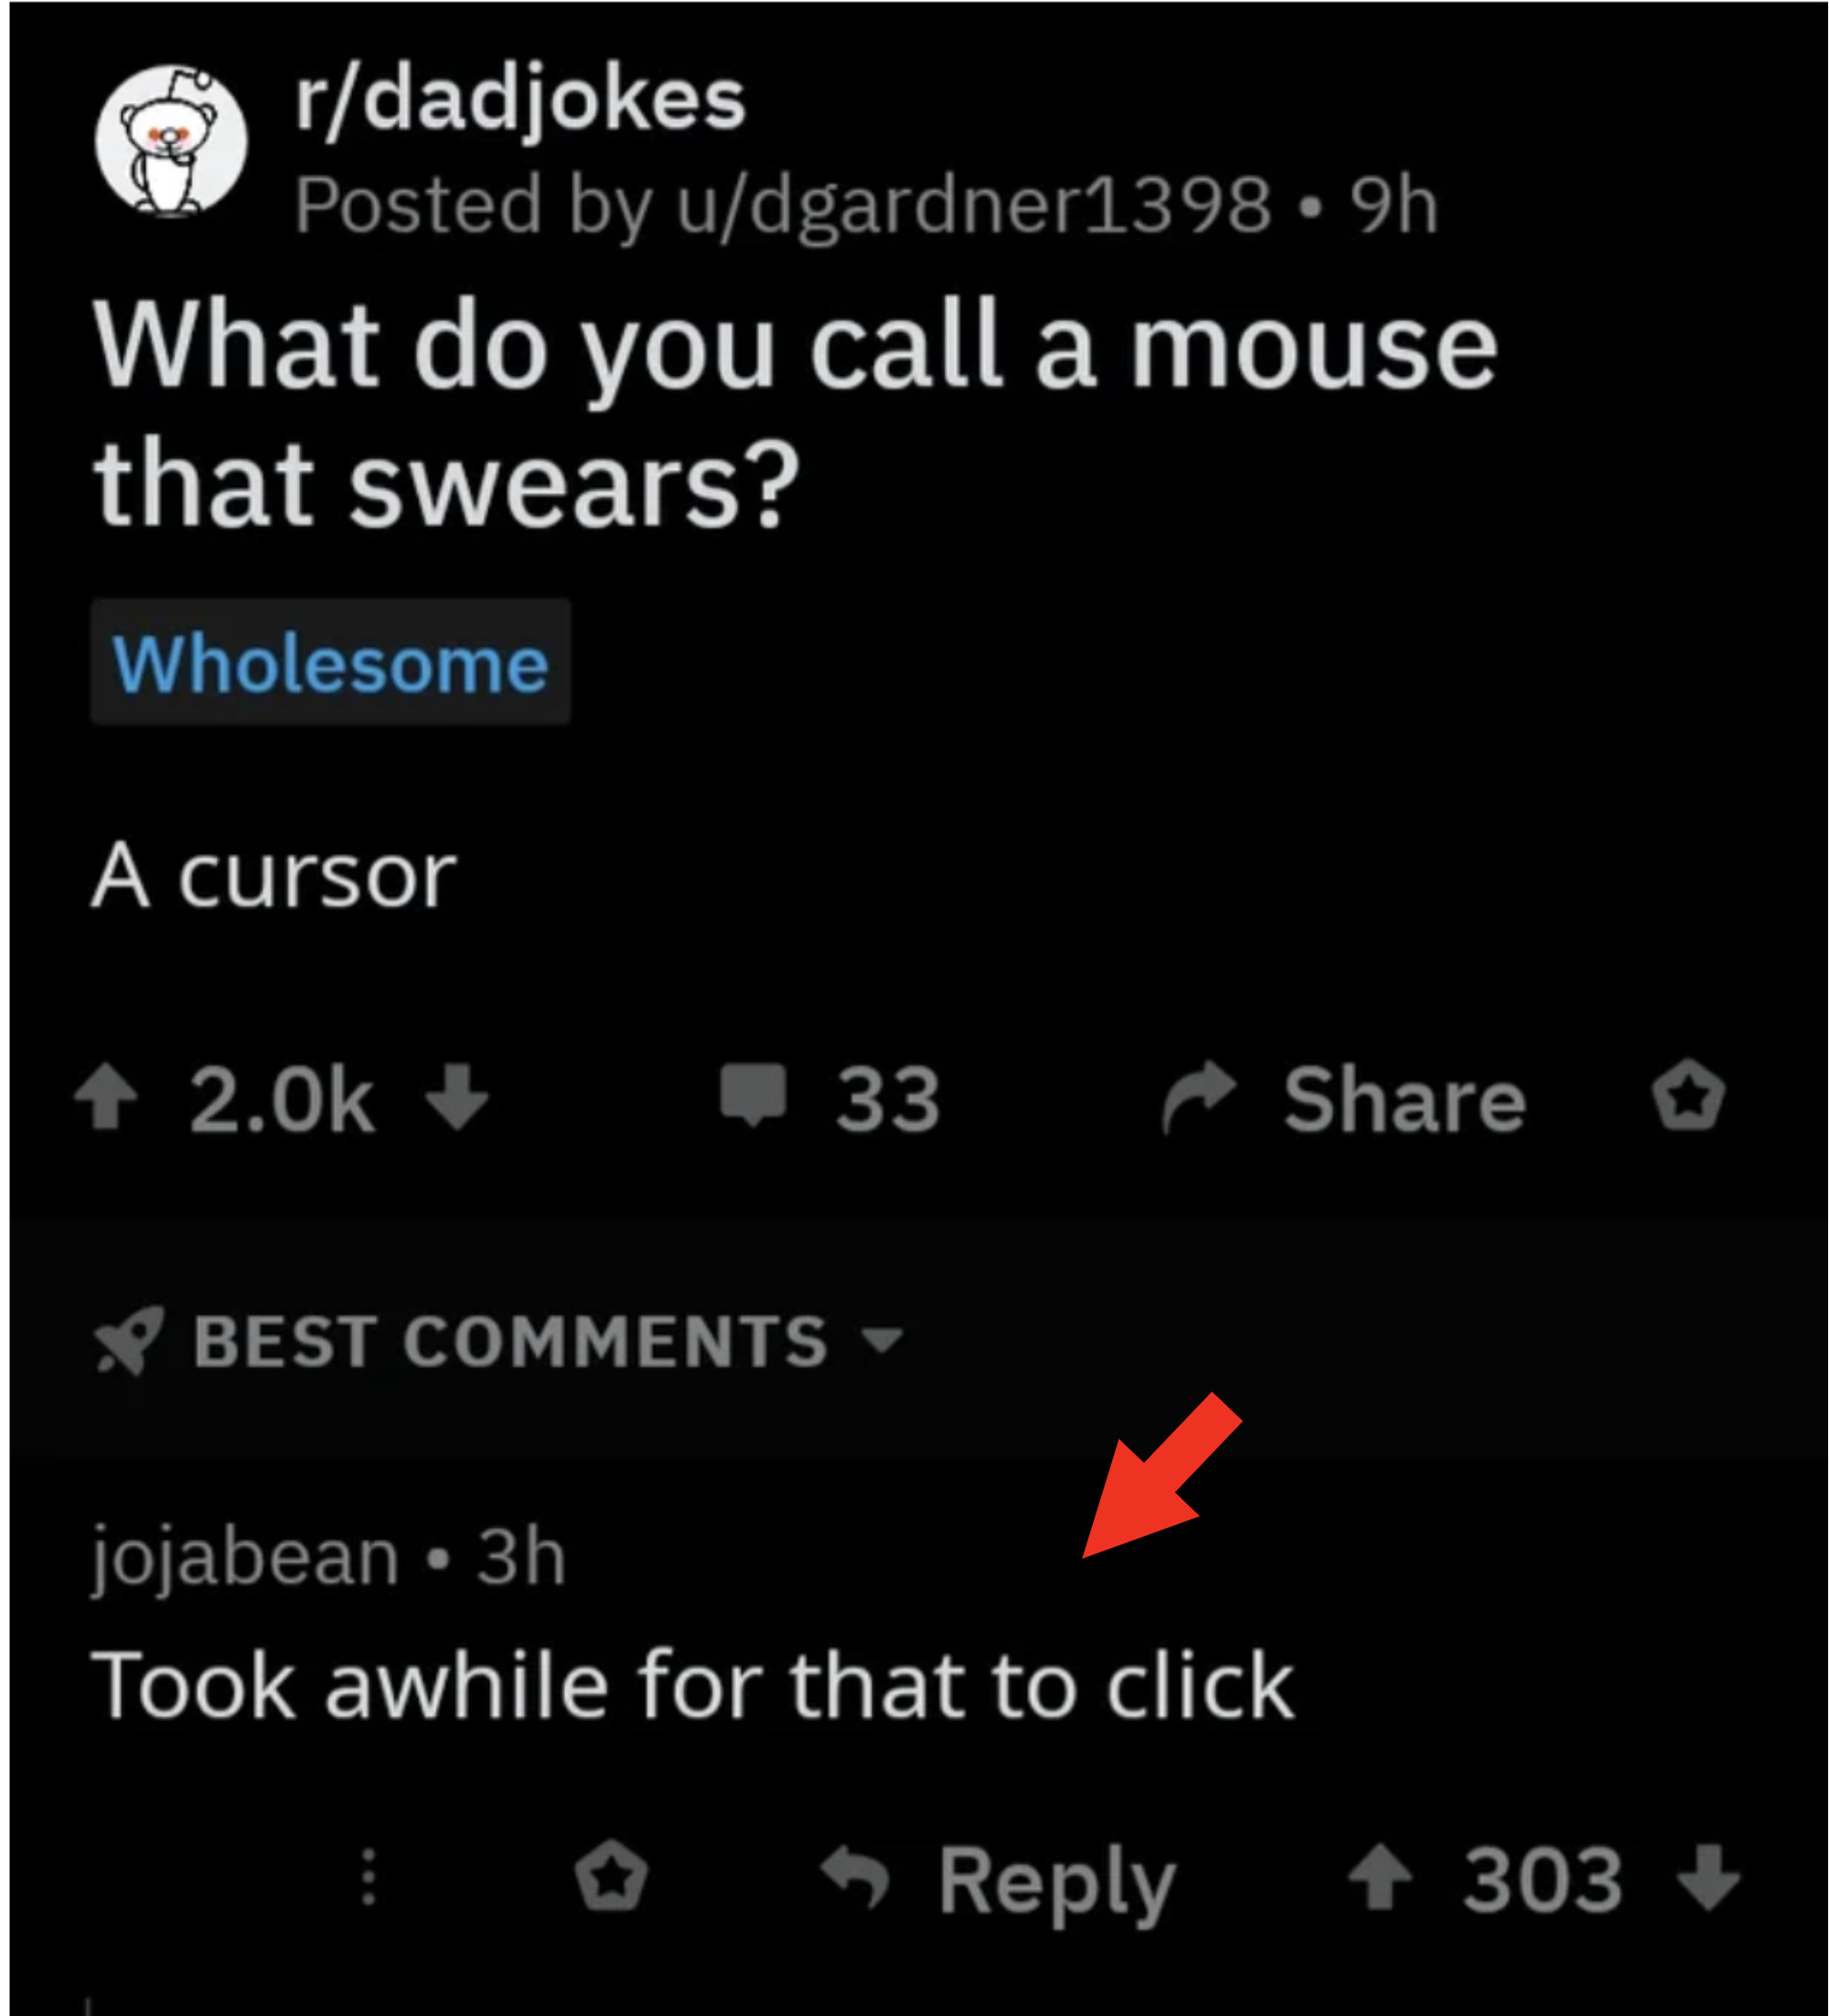 The joke says &quot;What do you call a mouse that swears? A cursor&quot; but spelled like the cursor of a computer mouse, and the commenter responds &quot;took a while for that to click&quot;